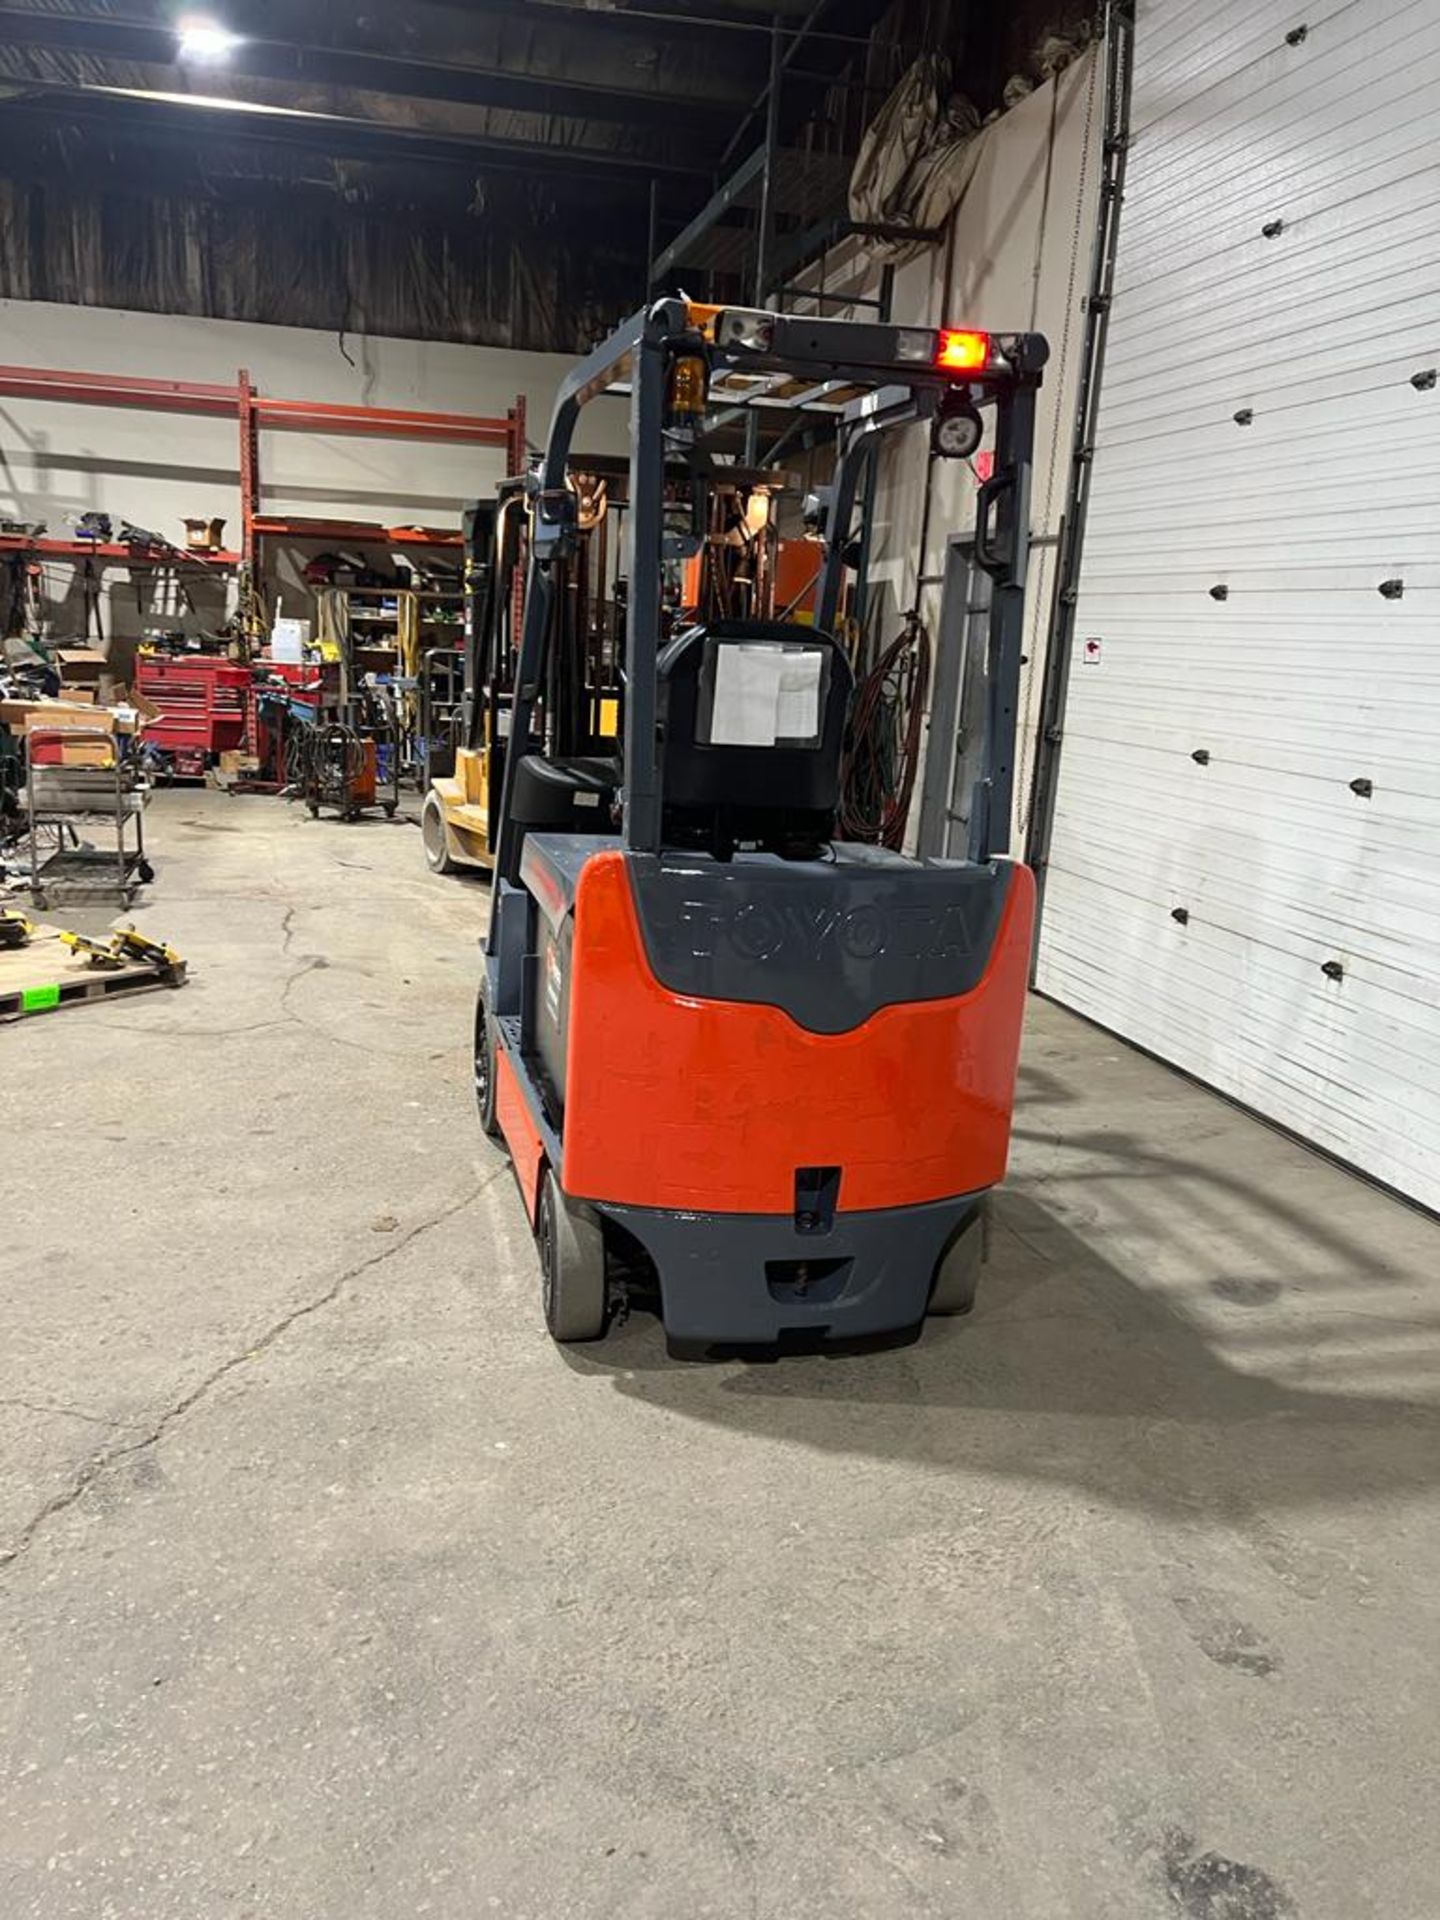 2014 Toyota 5,000lbs Capacity Forklift Electric 48V with 48" FORKS with Sideshift & Plumbed for Fork - Image 3 of 3